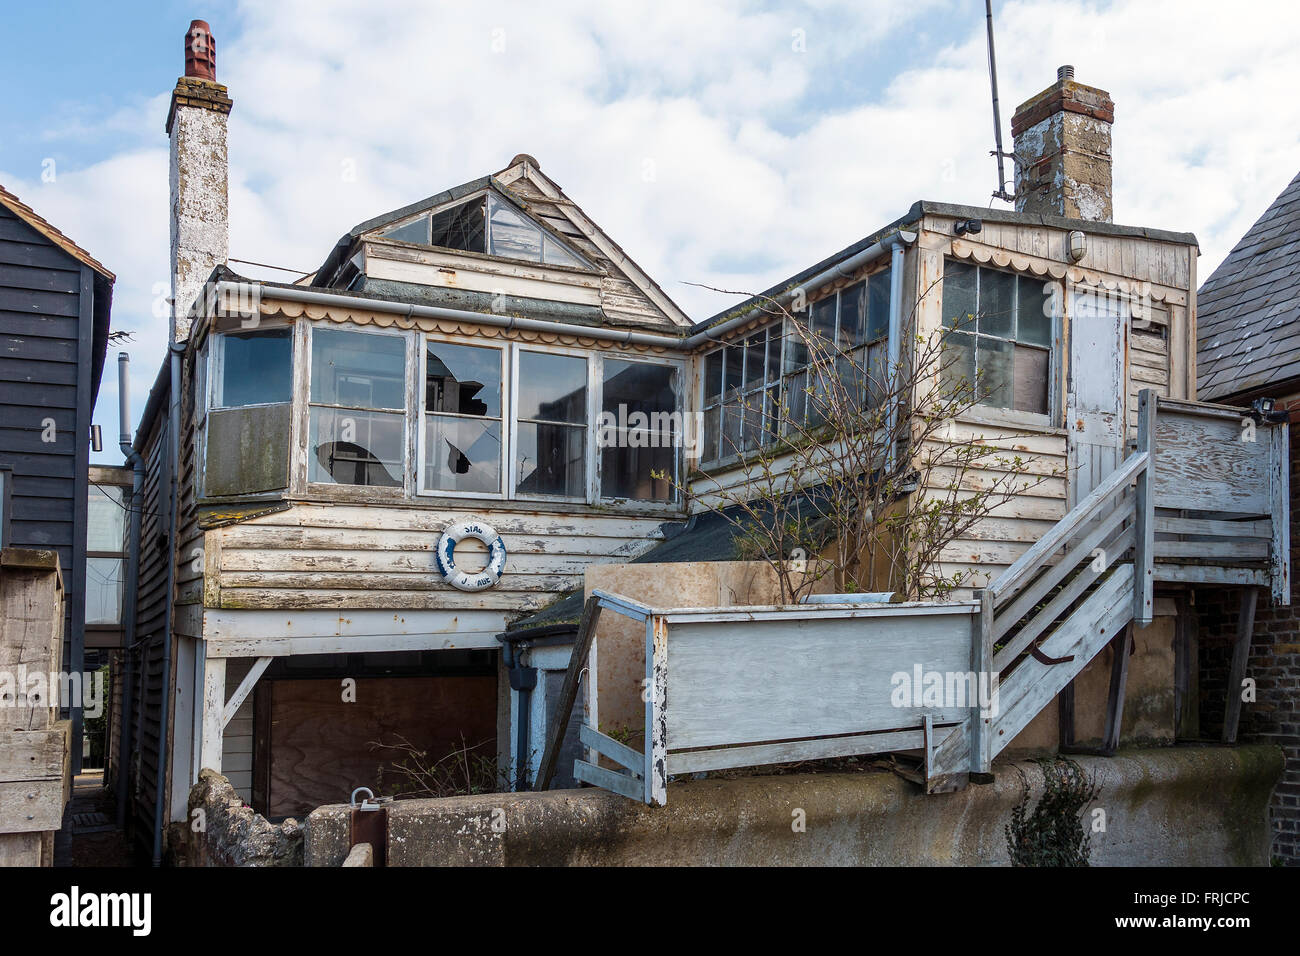 Stag Cottage Derelict Fishermans Hut Whitstable Beach Kent . Owned by the Whitstable Oyster Fishery Company Stock Photo